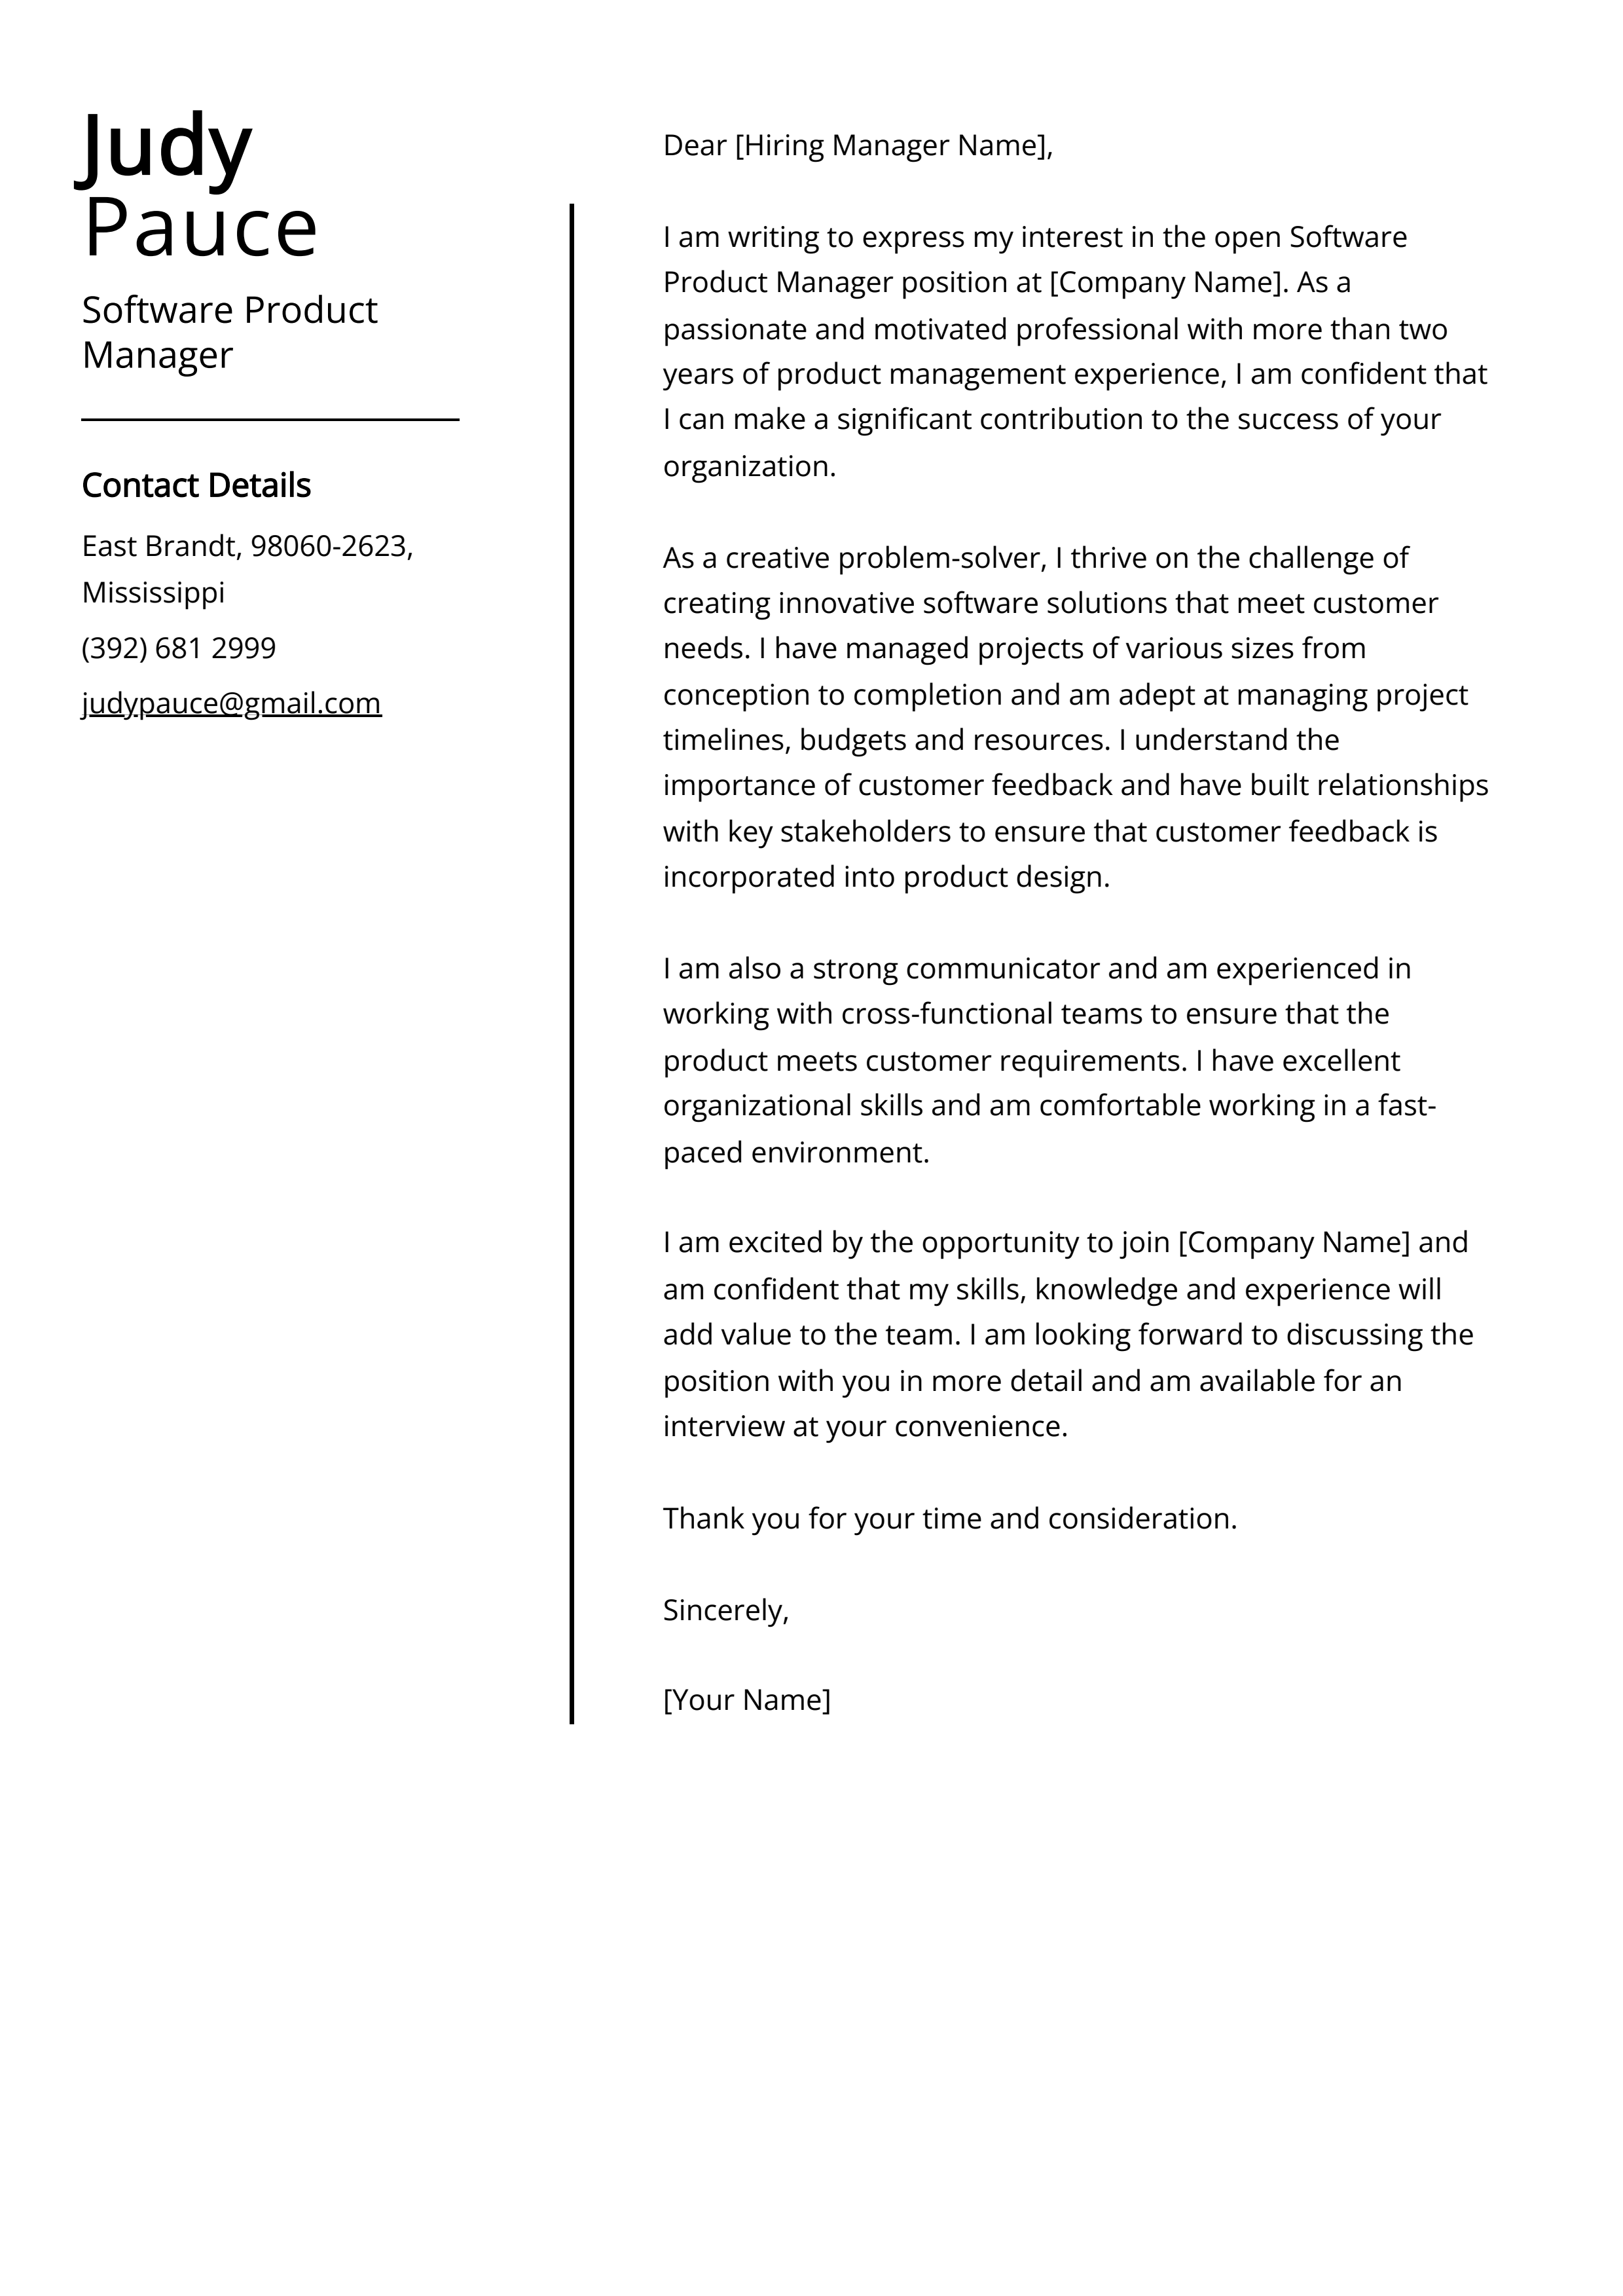 Software Product Manager Cover Letter Example